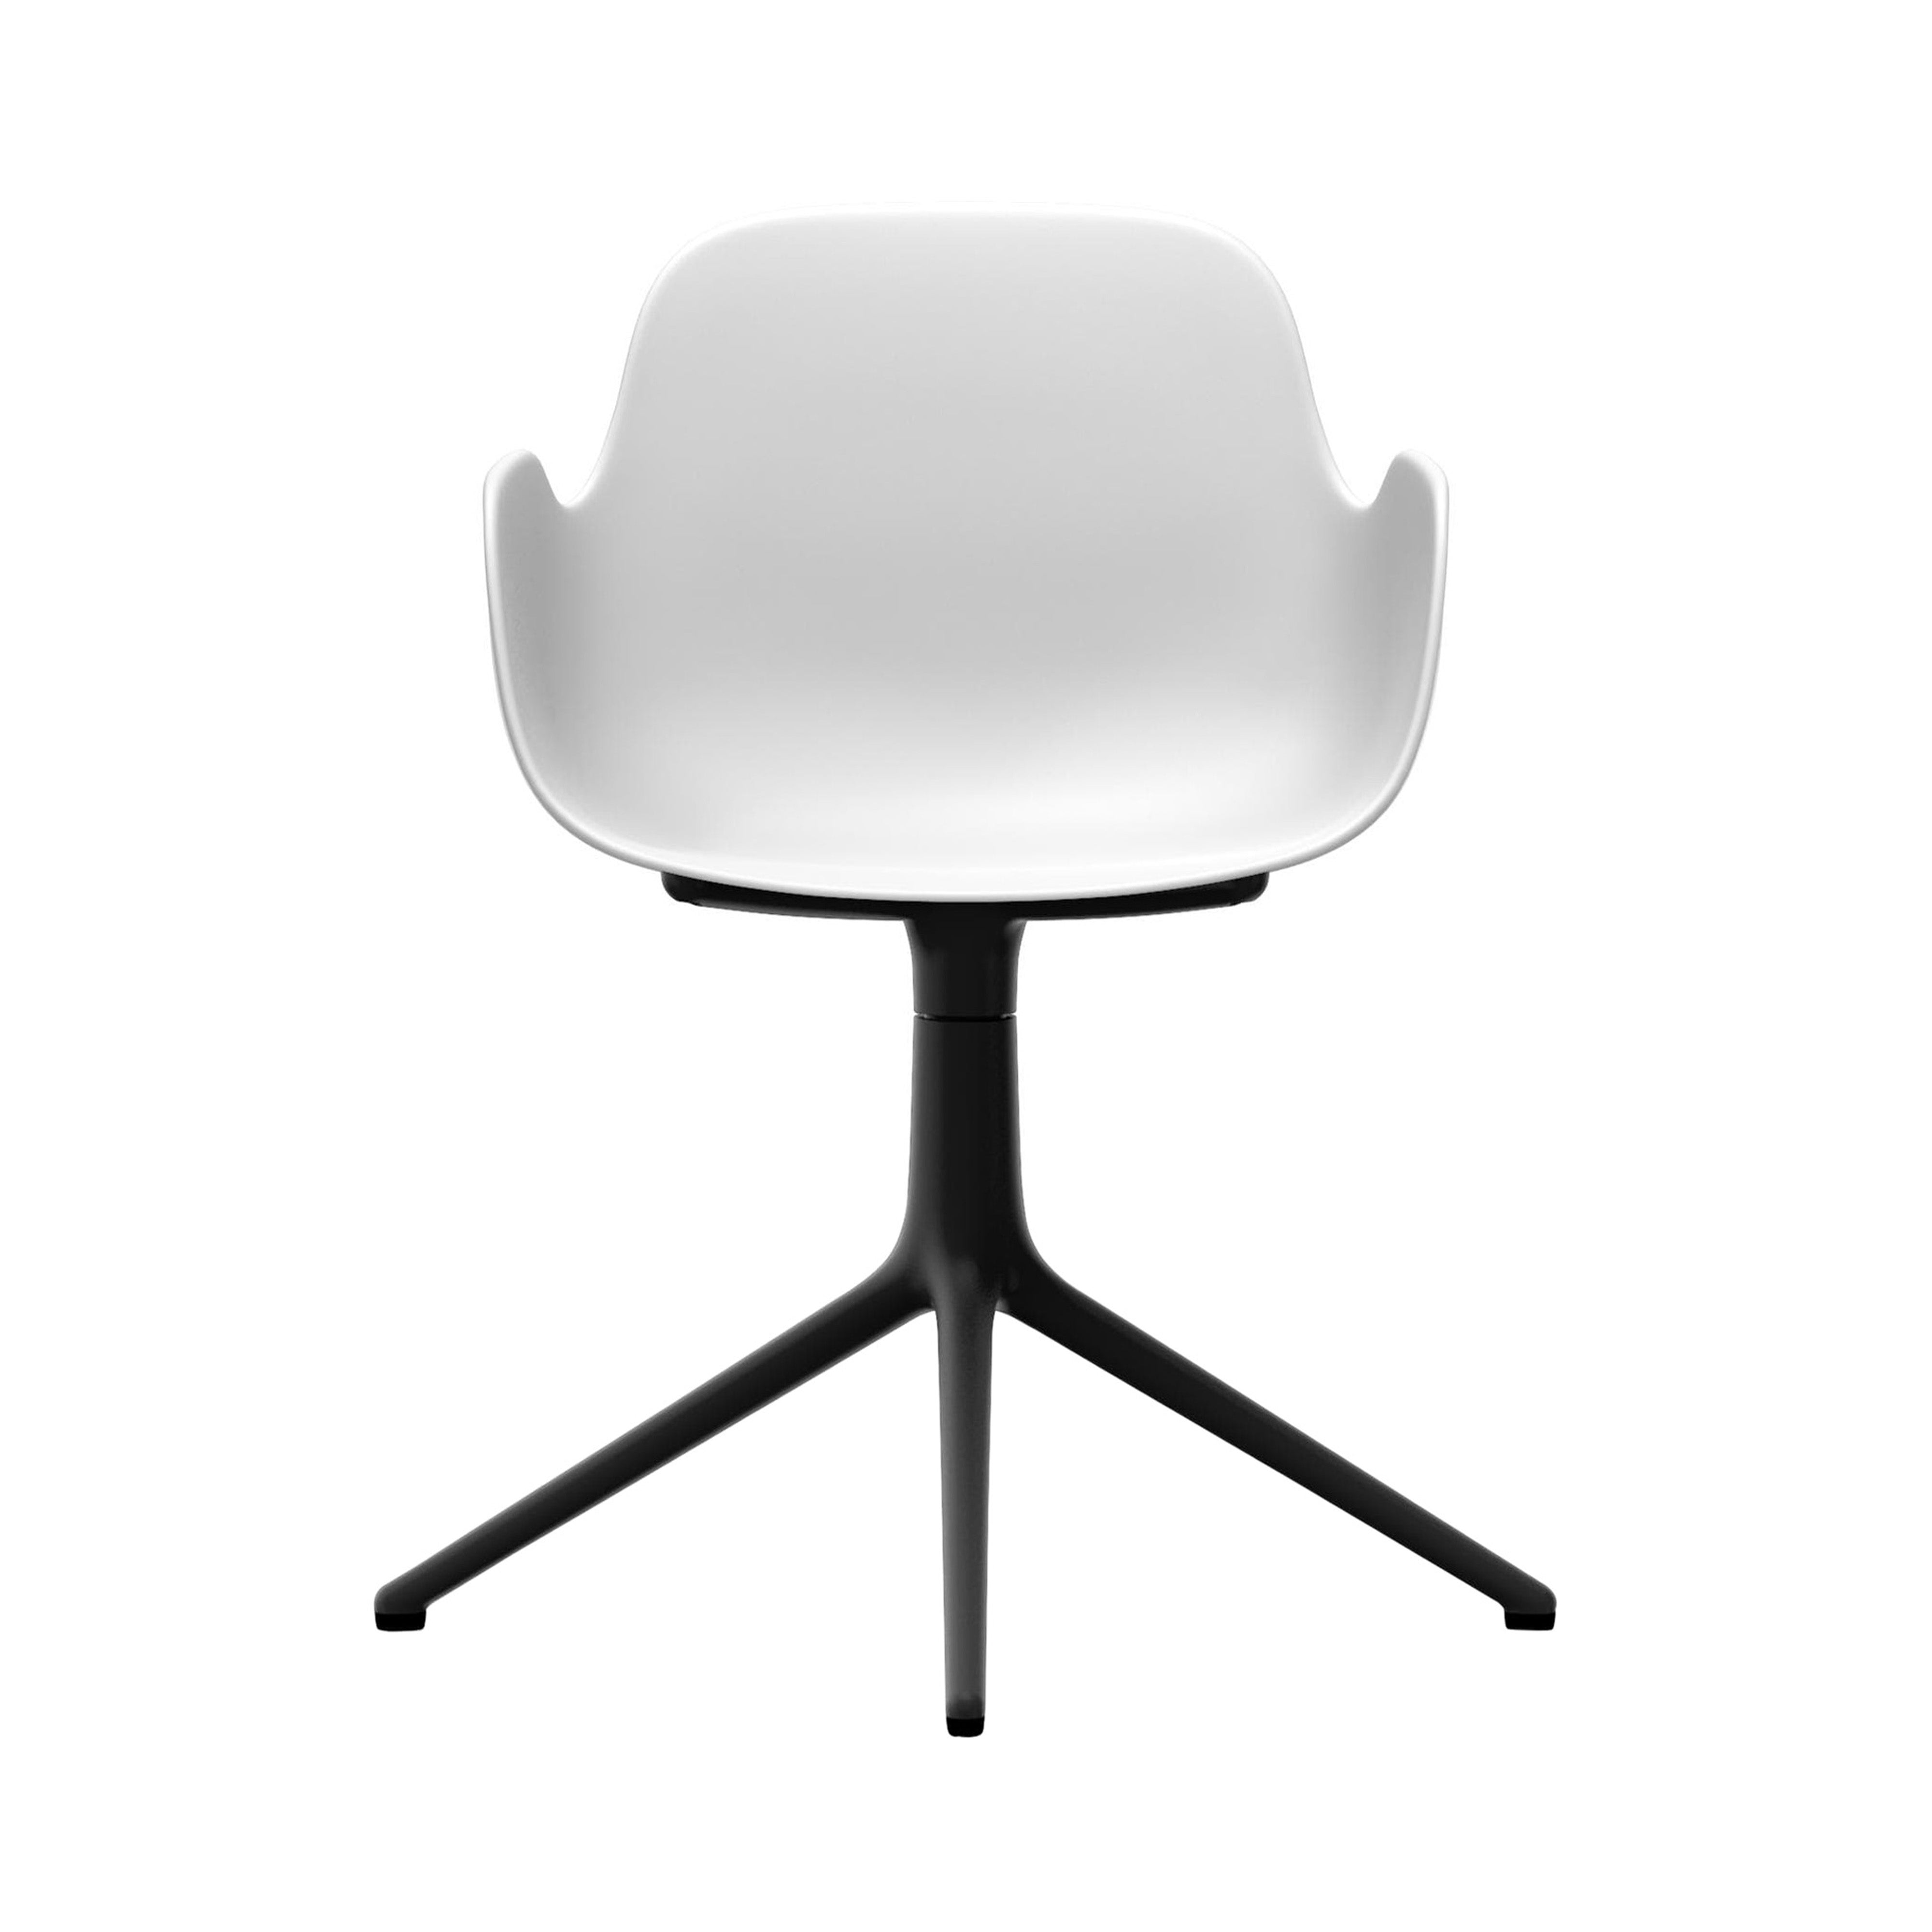 Form Armchair: Swivel + White + Black Aluminum + Without Casters